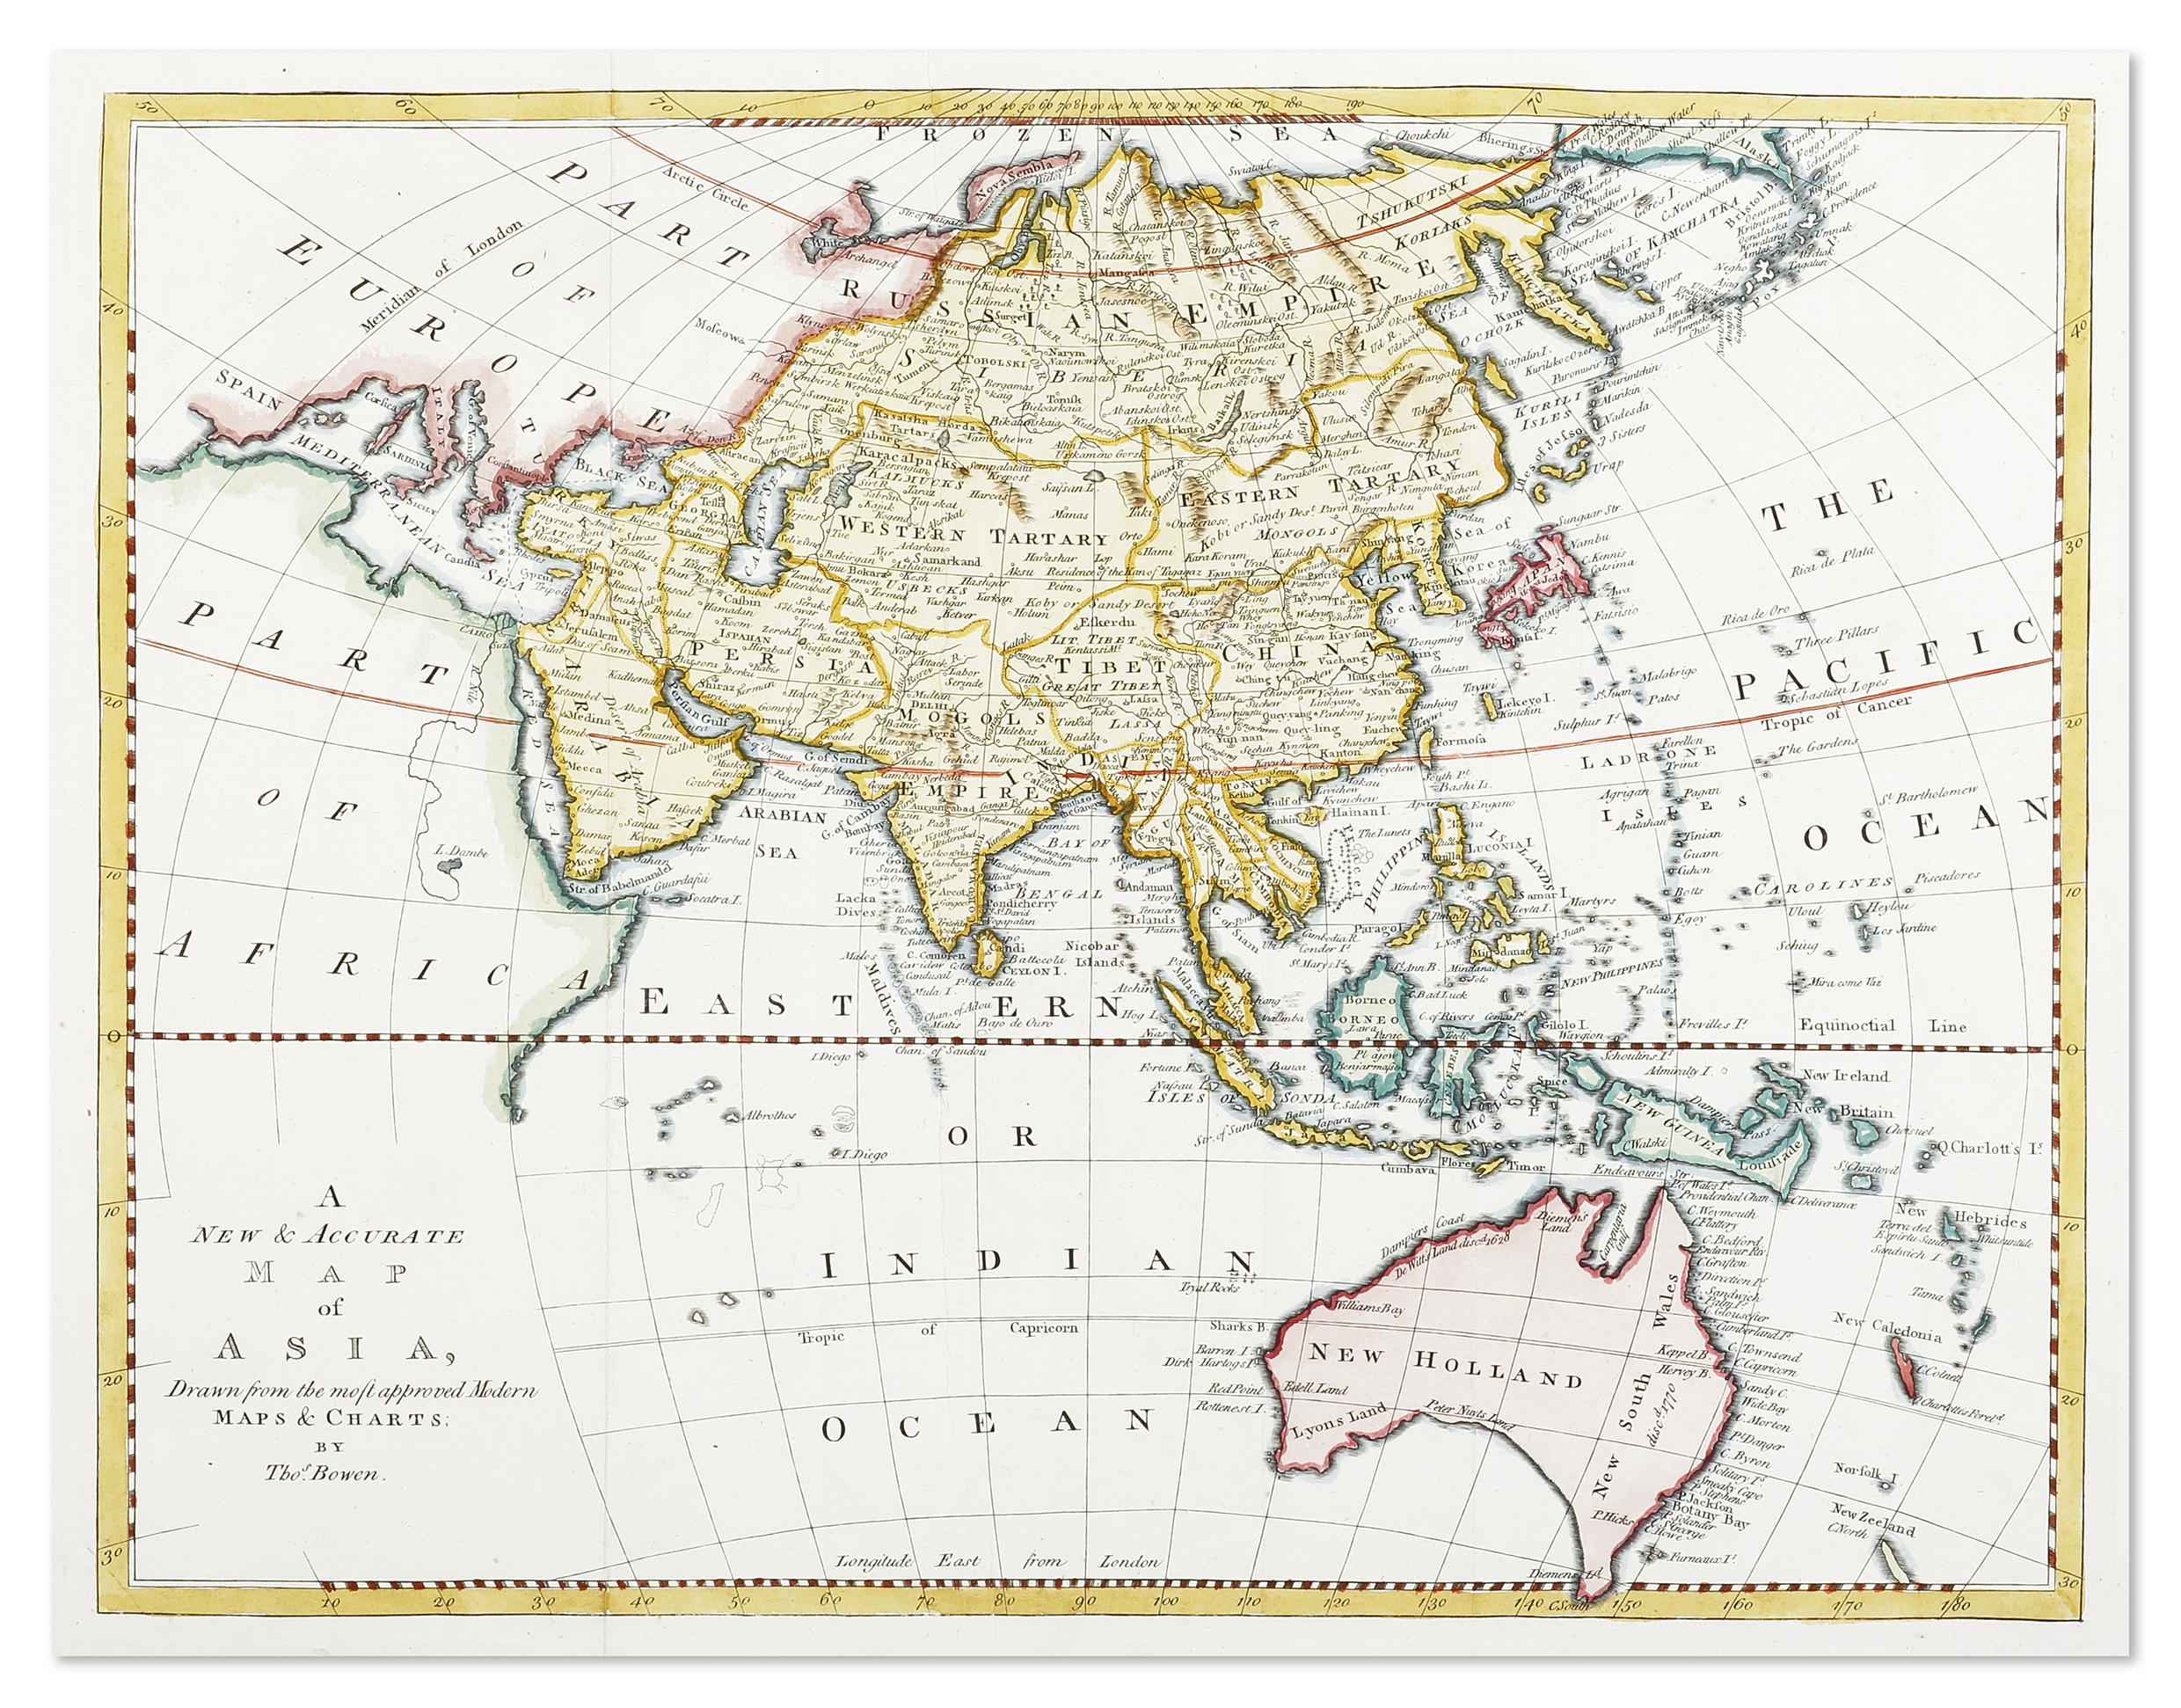 A New & Accurate Map of Asia, drawn from the most approved Modern maps & charts; by Thos. Bowen. - Antique Map from 1777